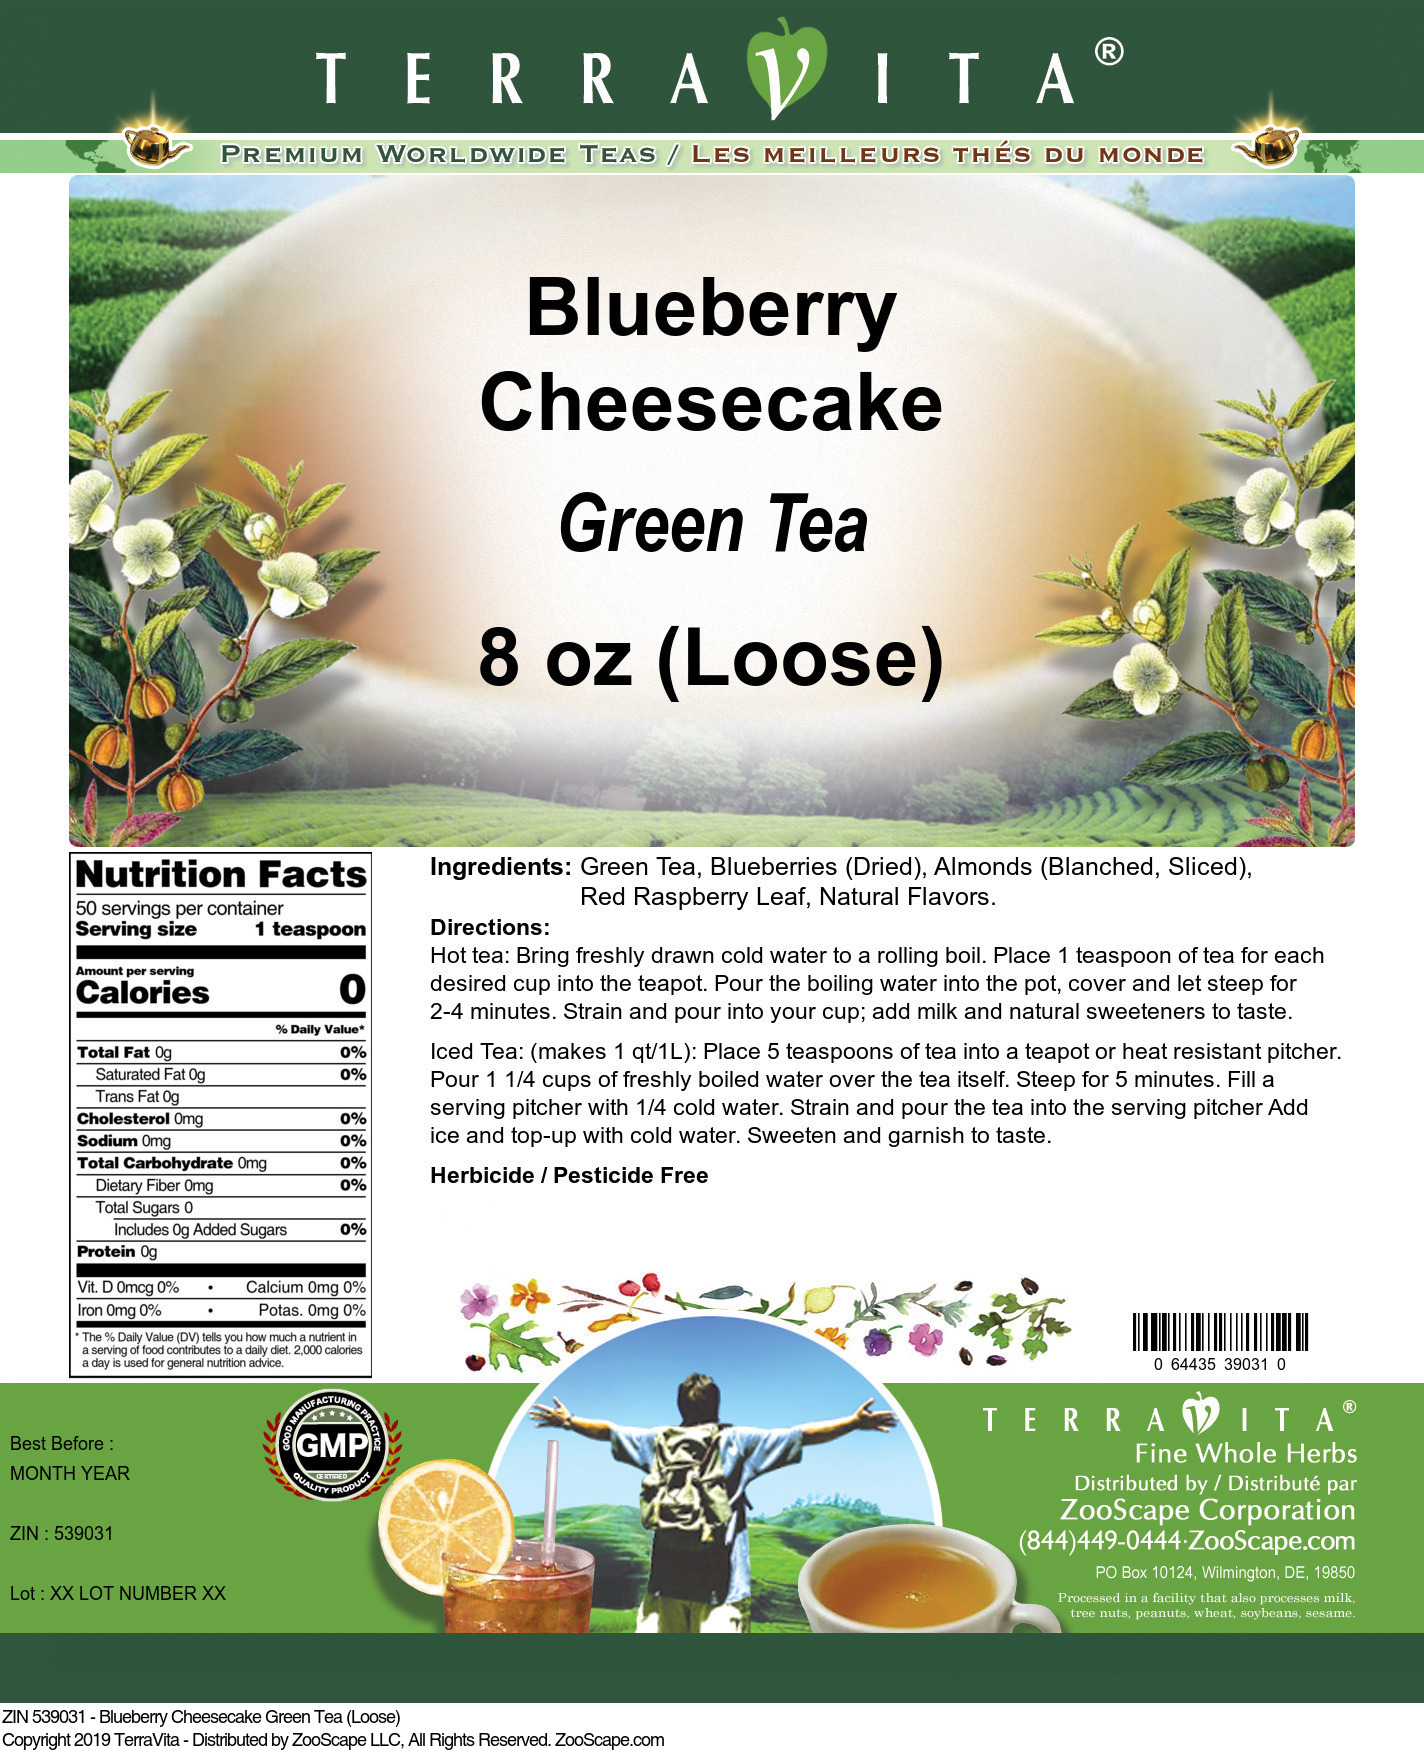 Blueberry Cheesecake Green Tea (Loose) - Label